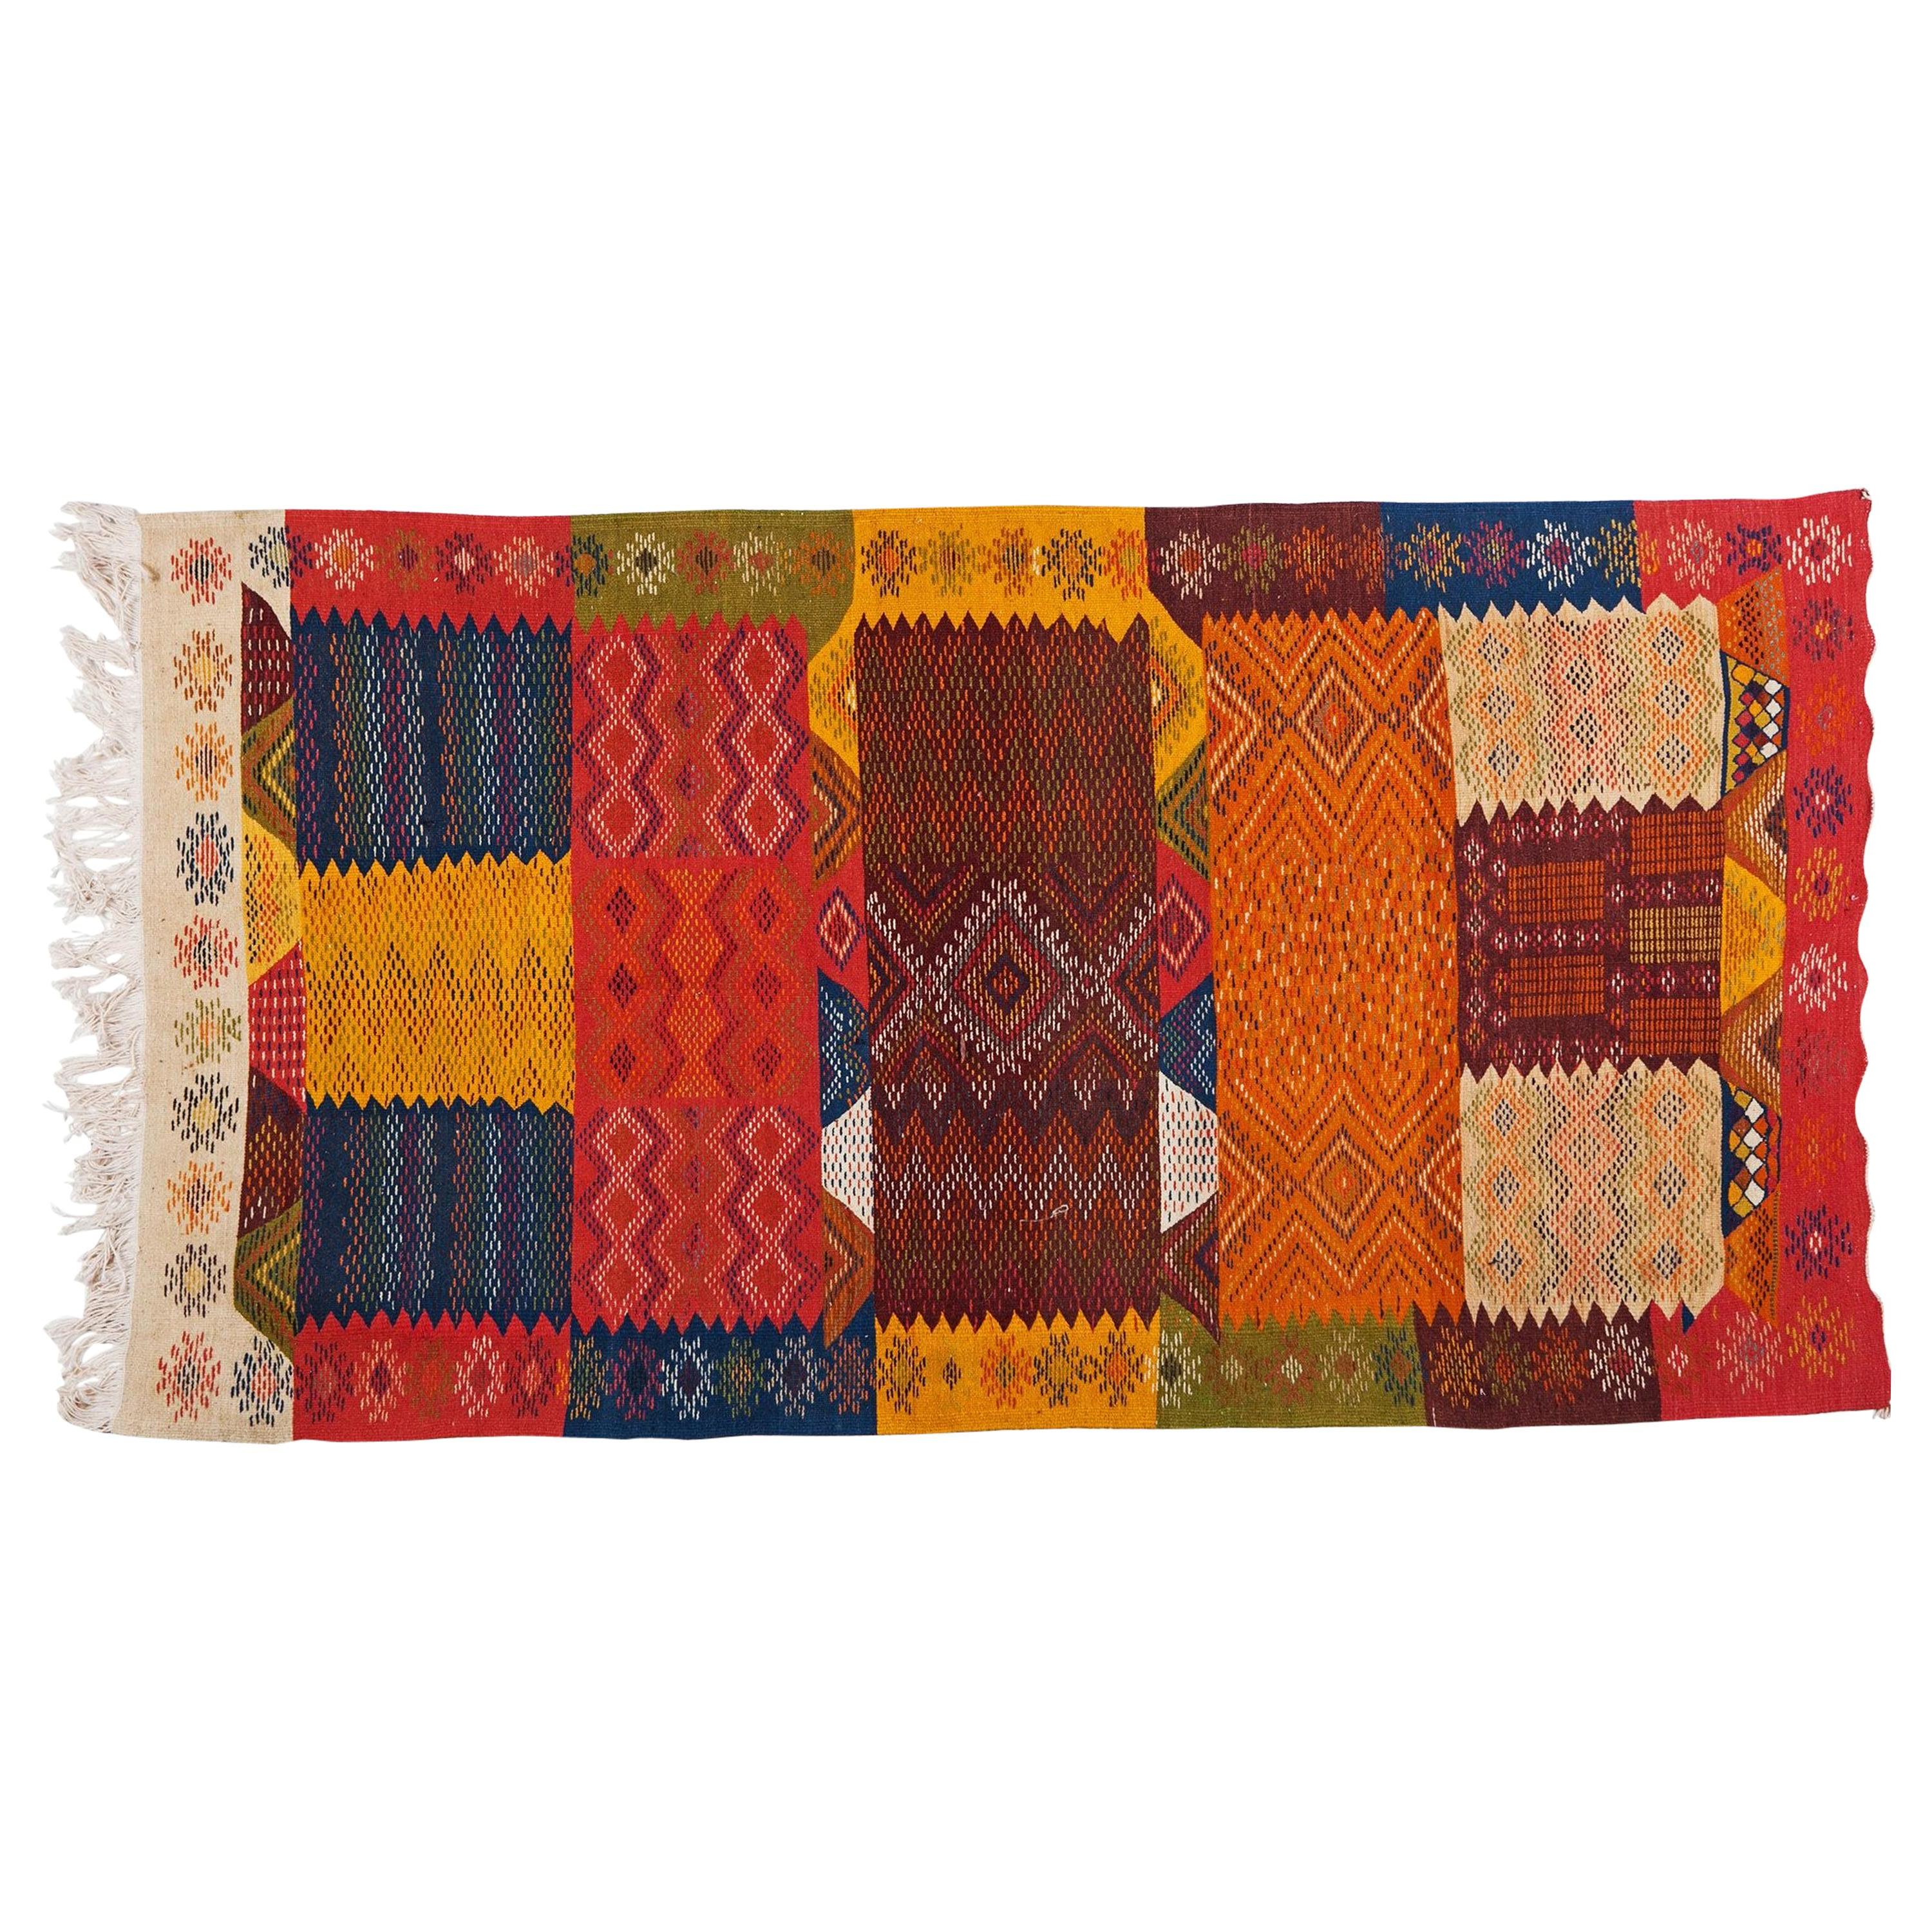 Handwoven Vintage Moroccan Rug in Wool with Organic Multi-Color Dye